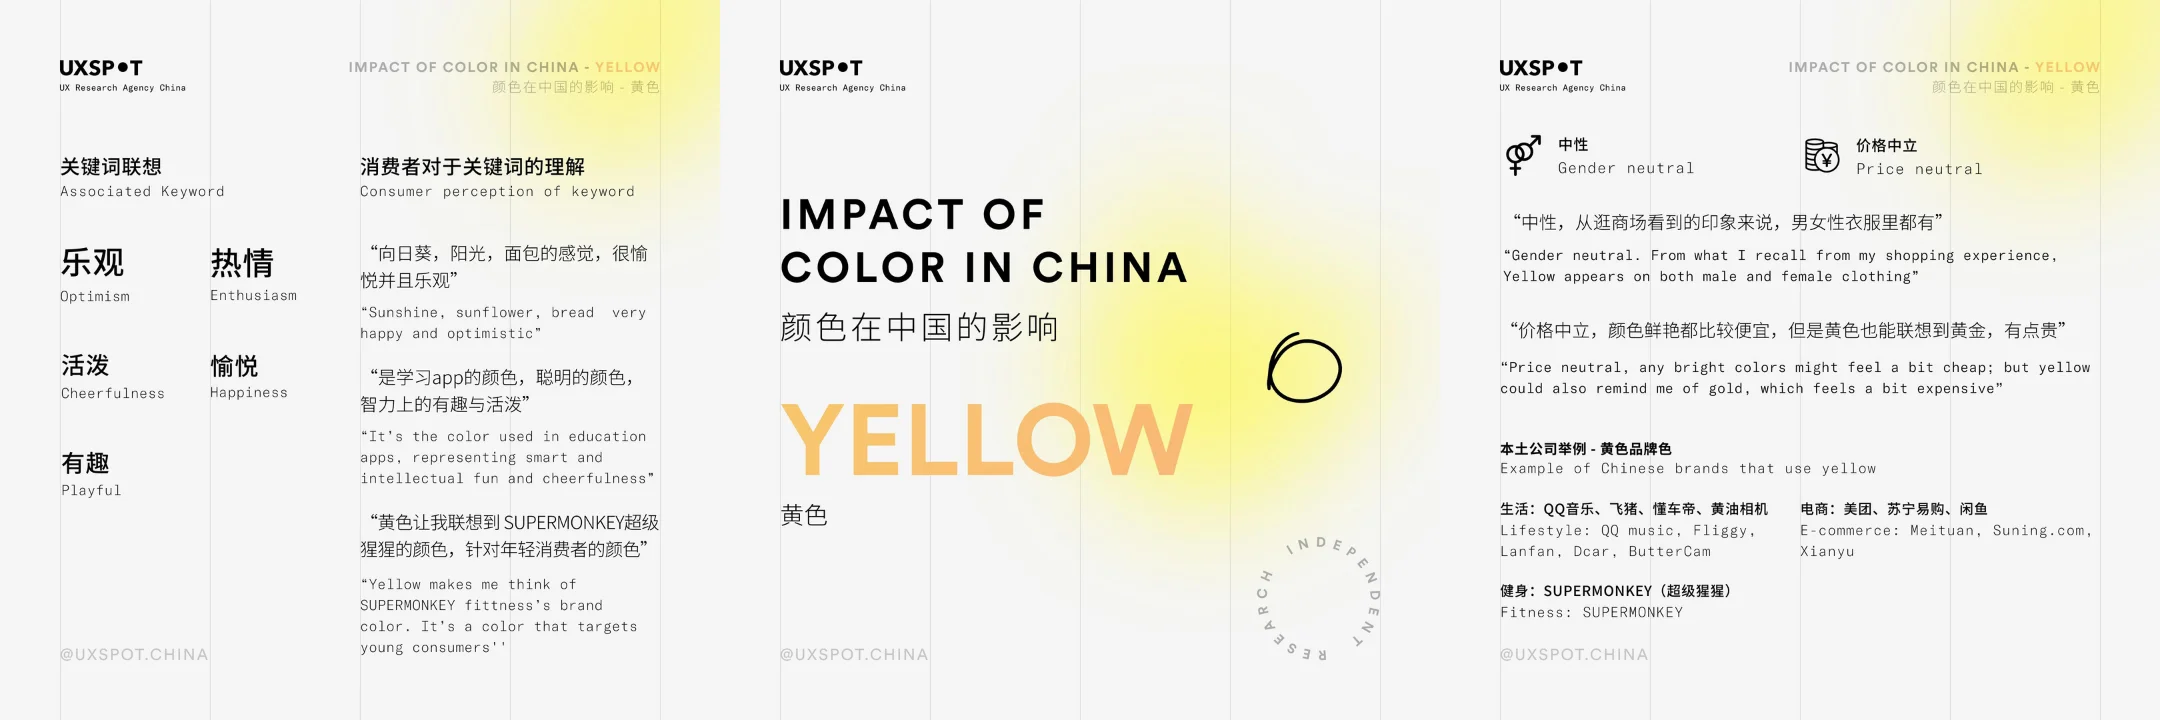 color psychology China color yellow data summary